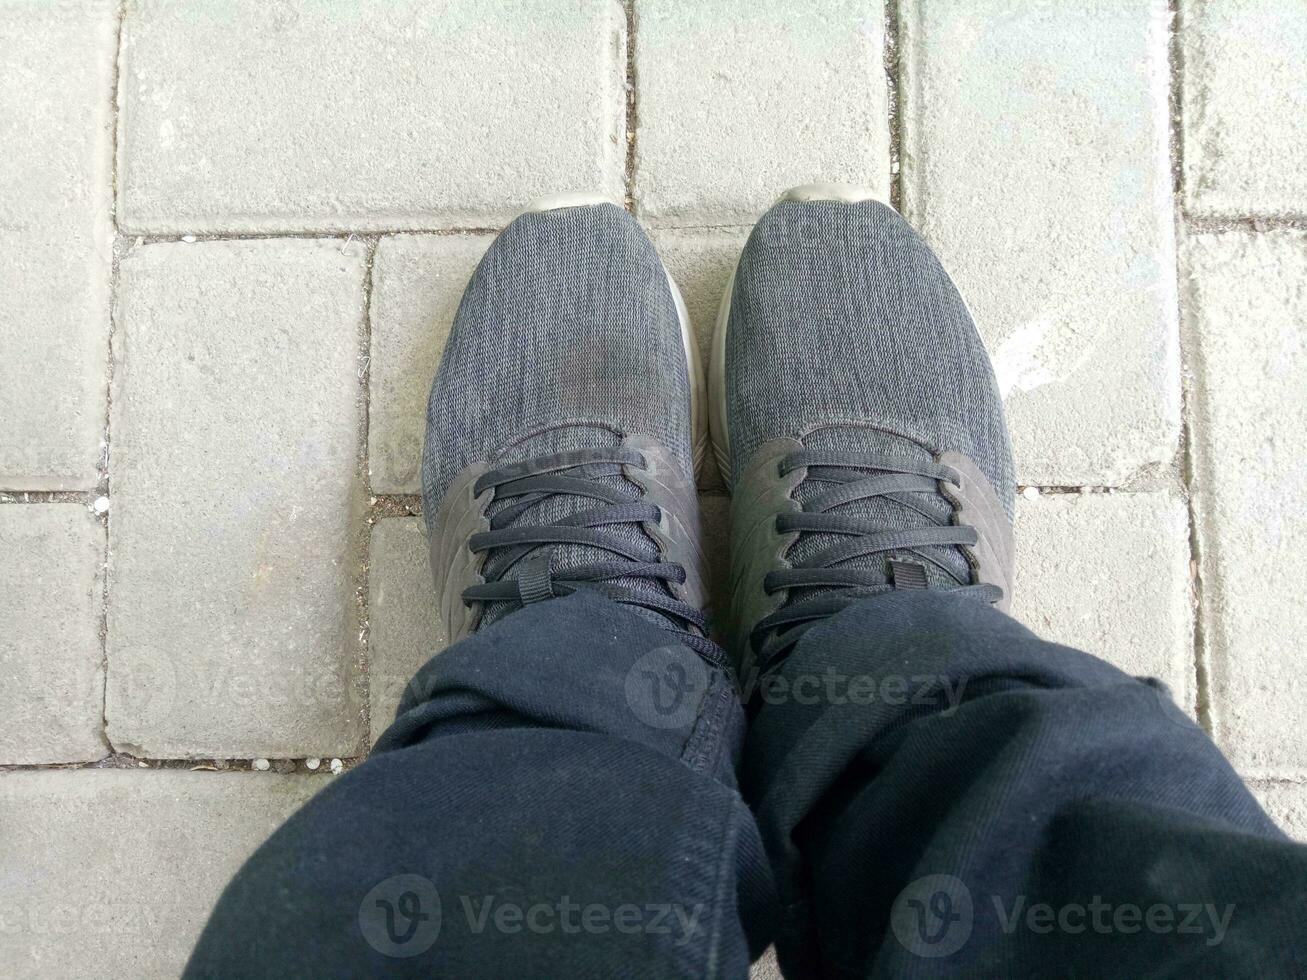 a pair of black shoes on brick paving, wearing black trousers, photographed from above photo